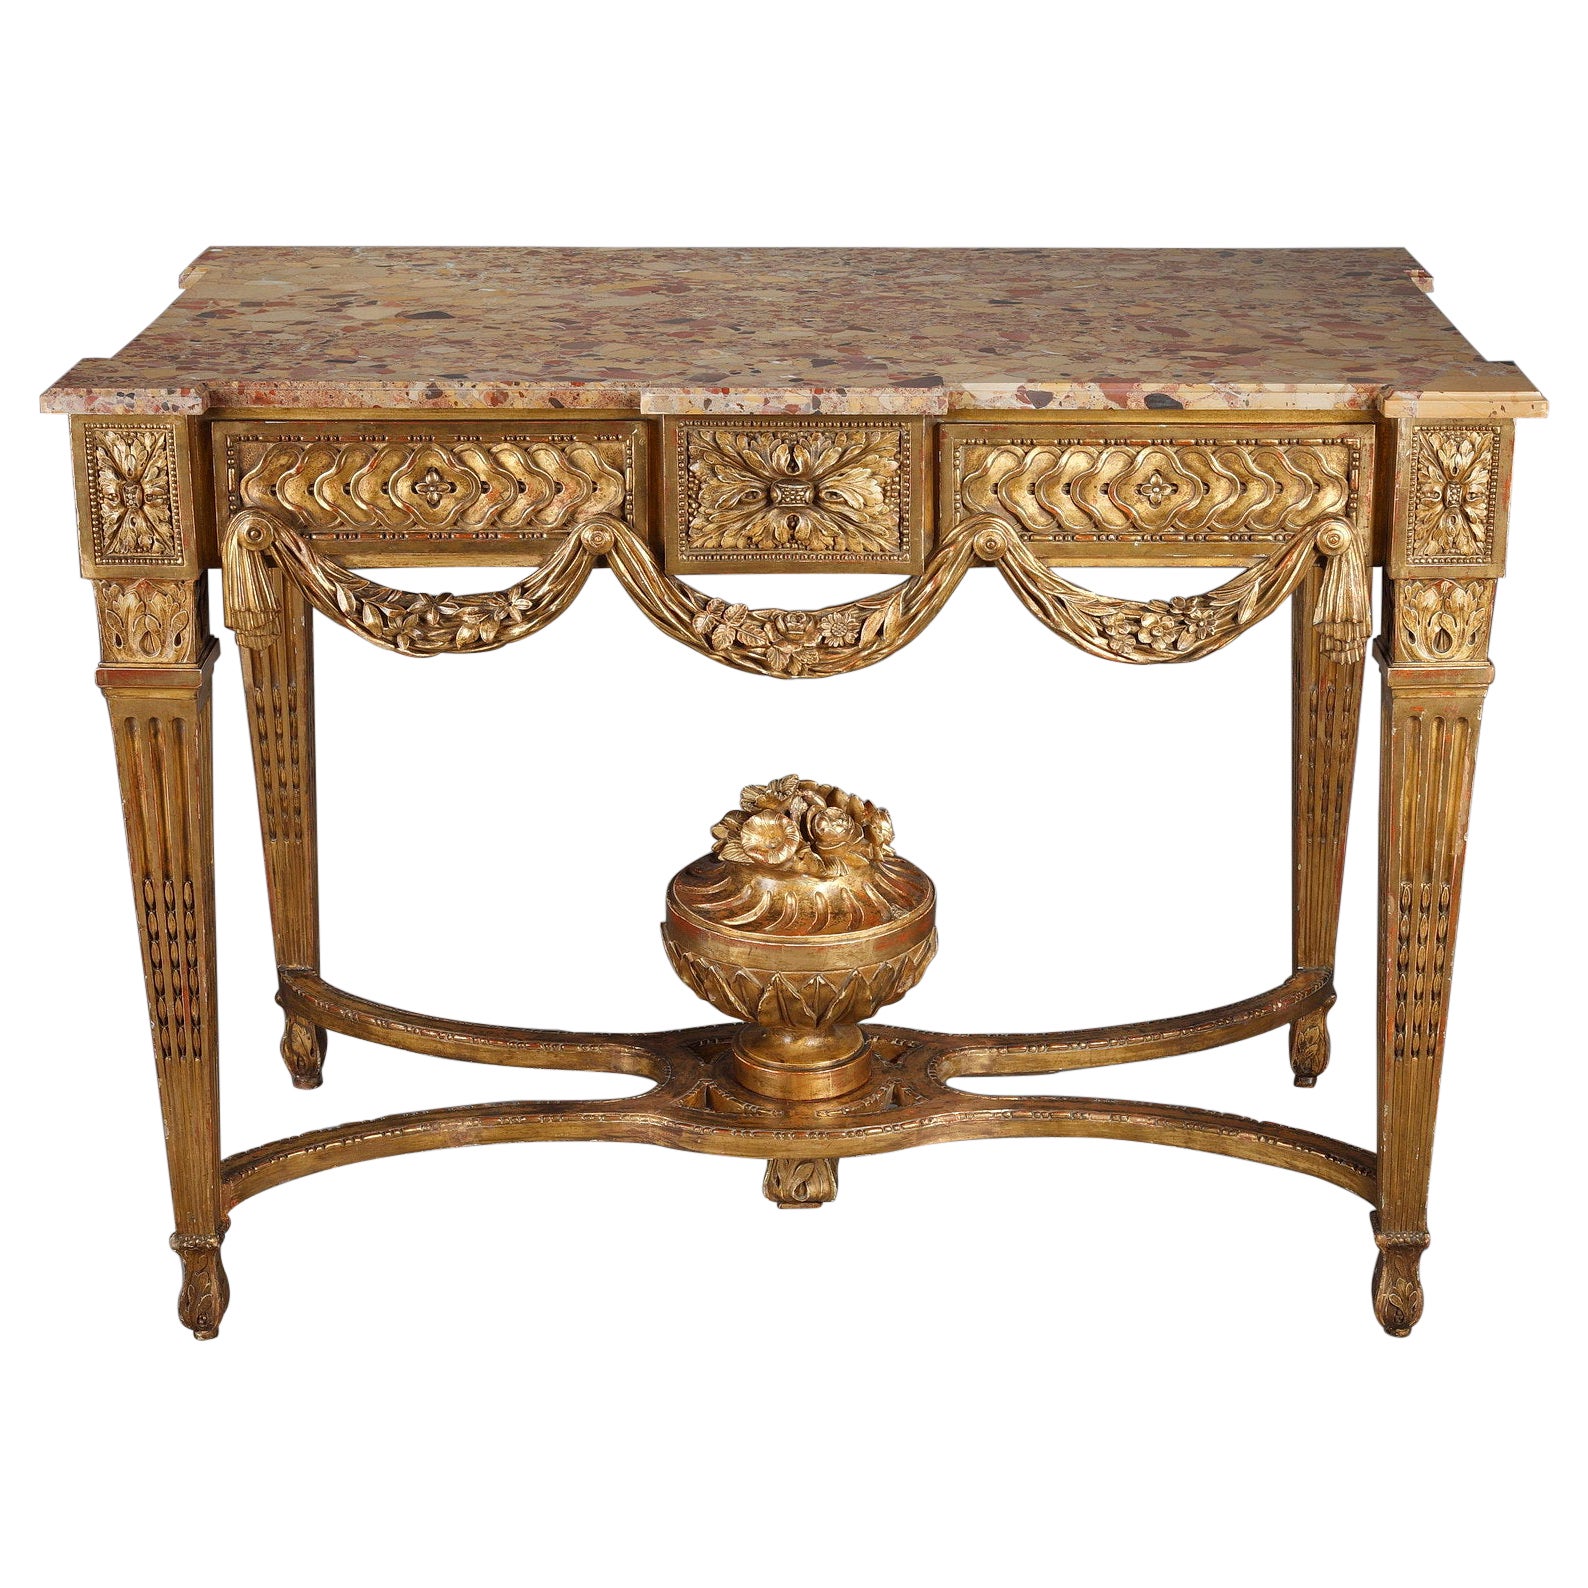 Gilded and Carved Wood Console in the Louis XVI Style